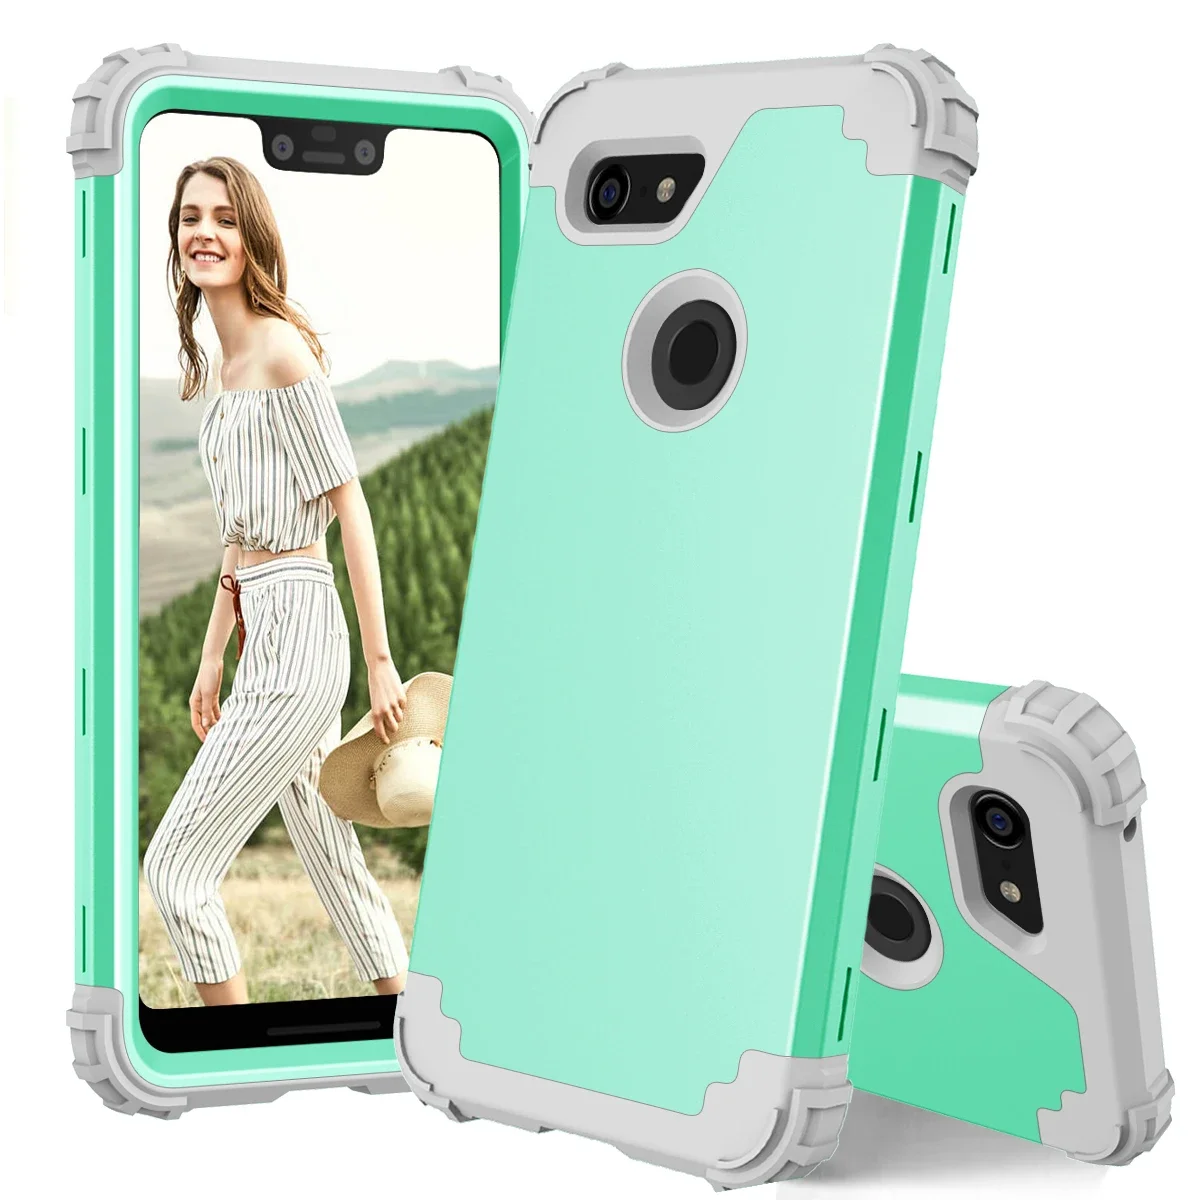 

Shockproof Protect For Google Pixel 3 XL Case An Ultra-thin Hybrid Hard Rubber Impact Armor Phone Cases Cover For Google Pixel 3